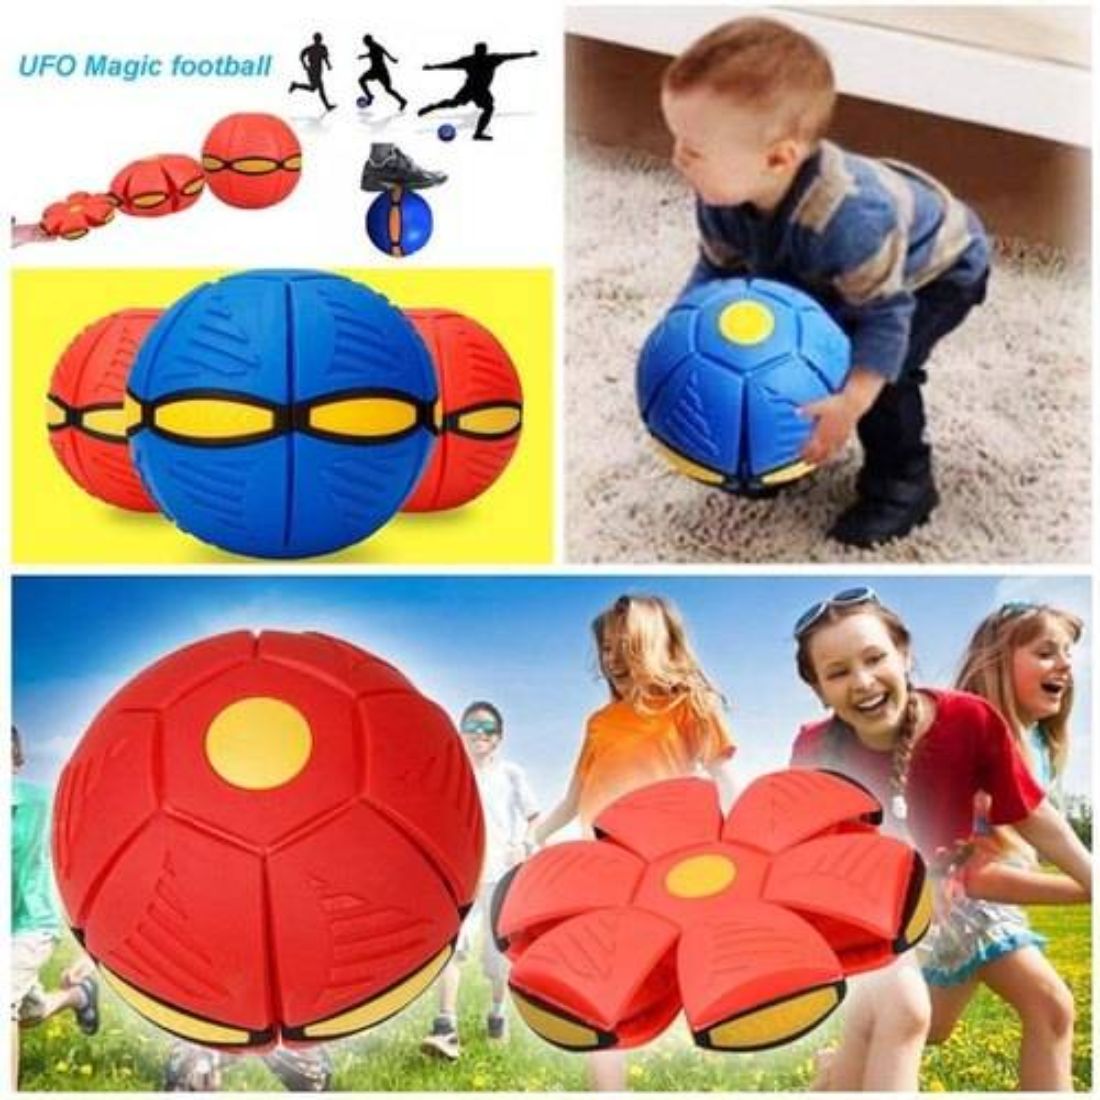 LED Flying UFO Magic Ball - Interactive Outdoor Football Game Toy for Kids